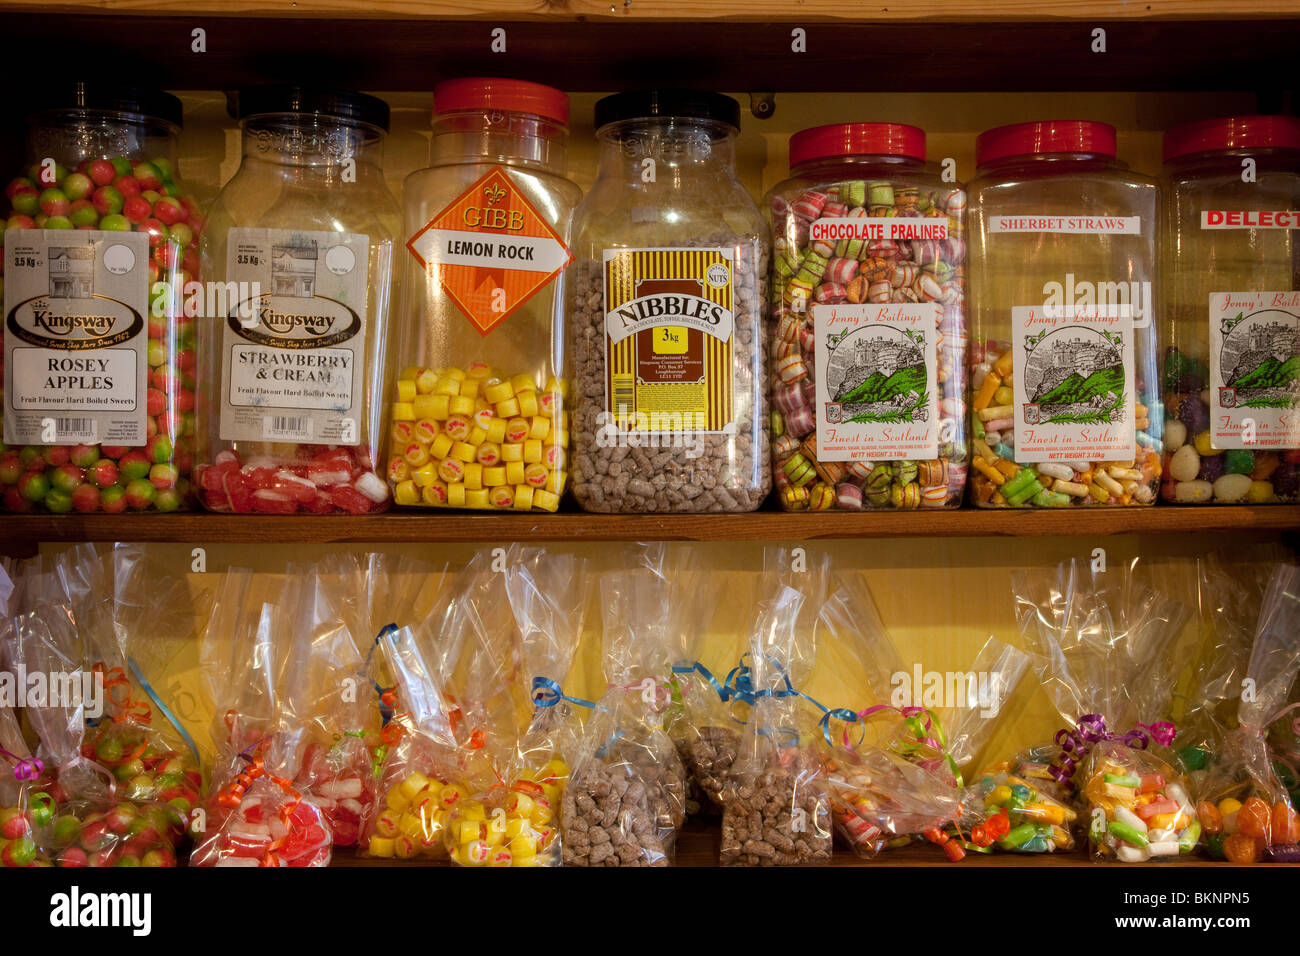 https://c8.alamy.com/comp/BKNPN5/old-fashioned-sweet-shop-boiled-sweets-jars-with-packets-of-confectionery-BKNPN5.jpg